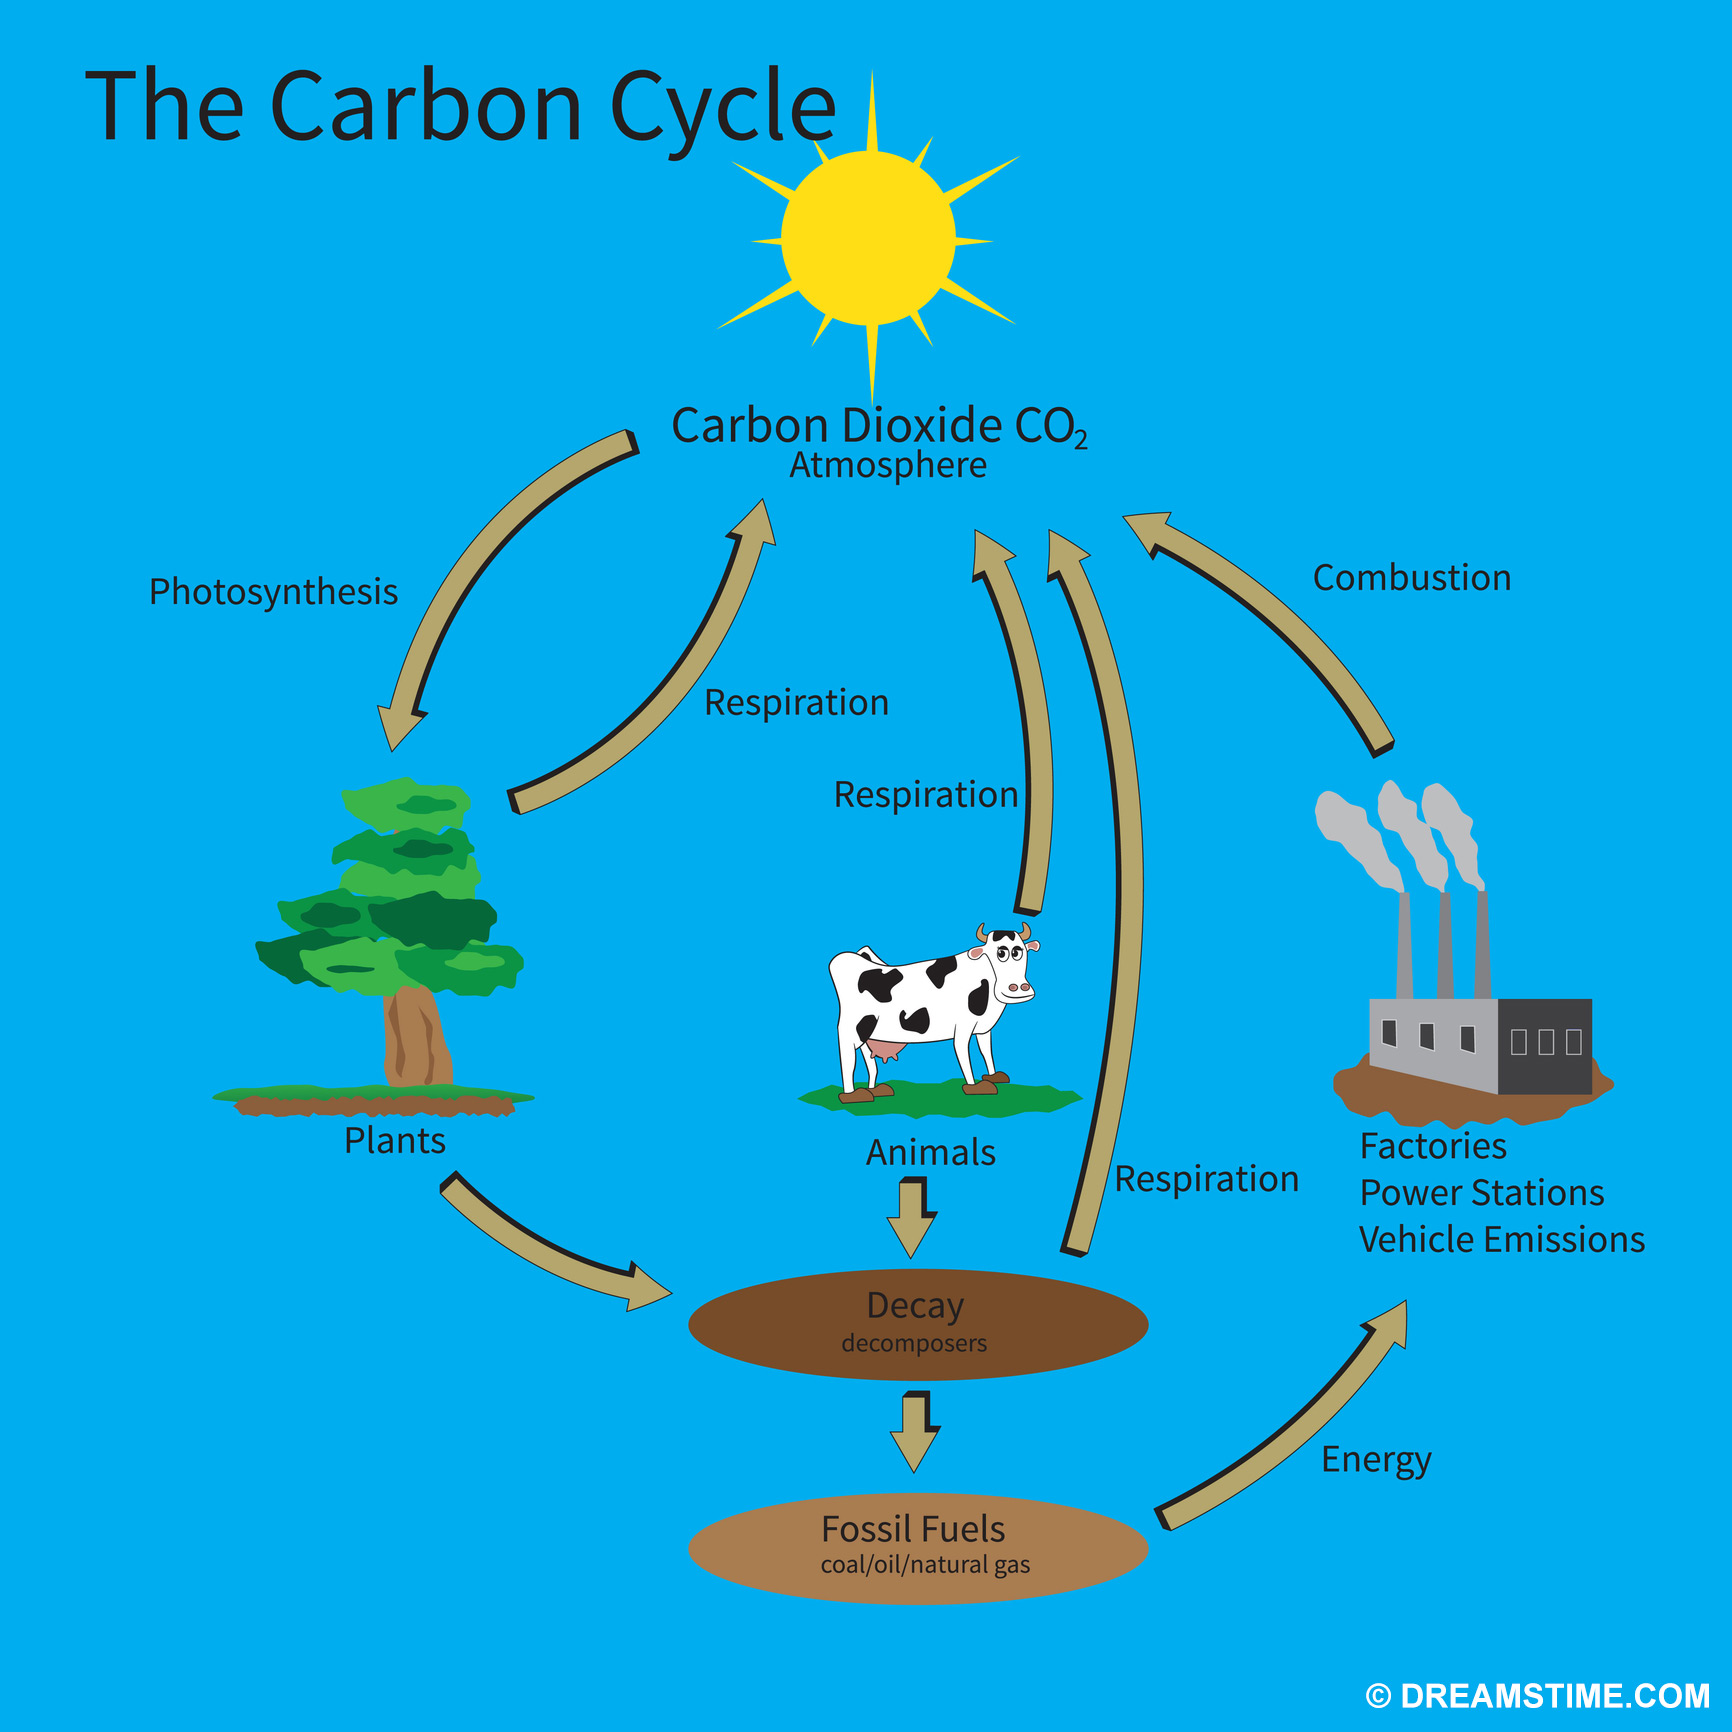 The Carbon Cycle showing how carbon is recycled in the environment